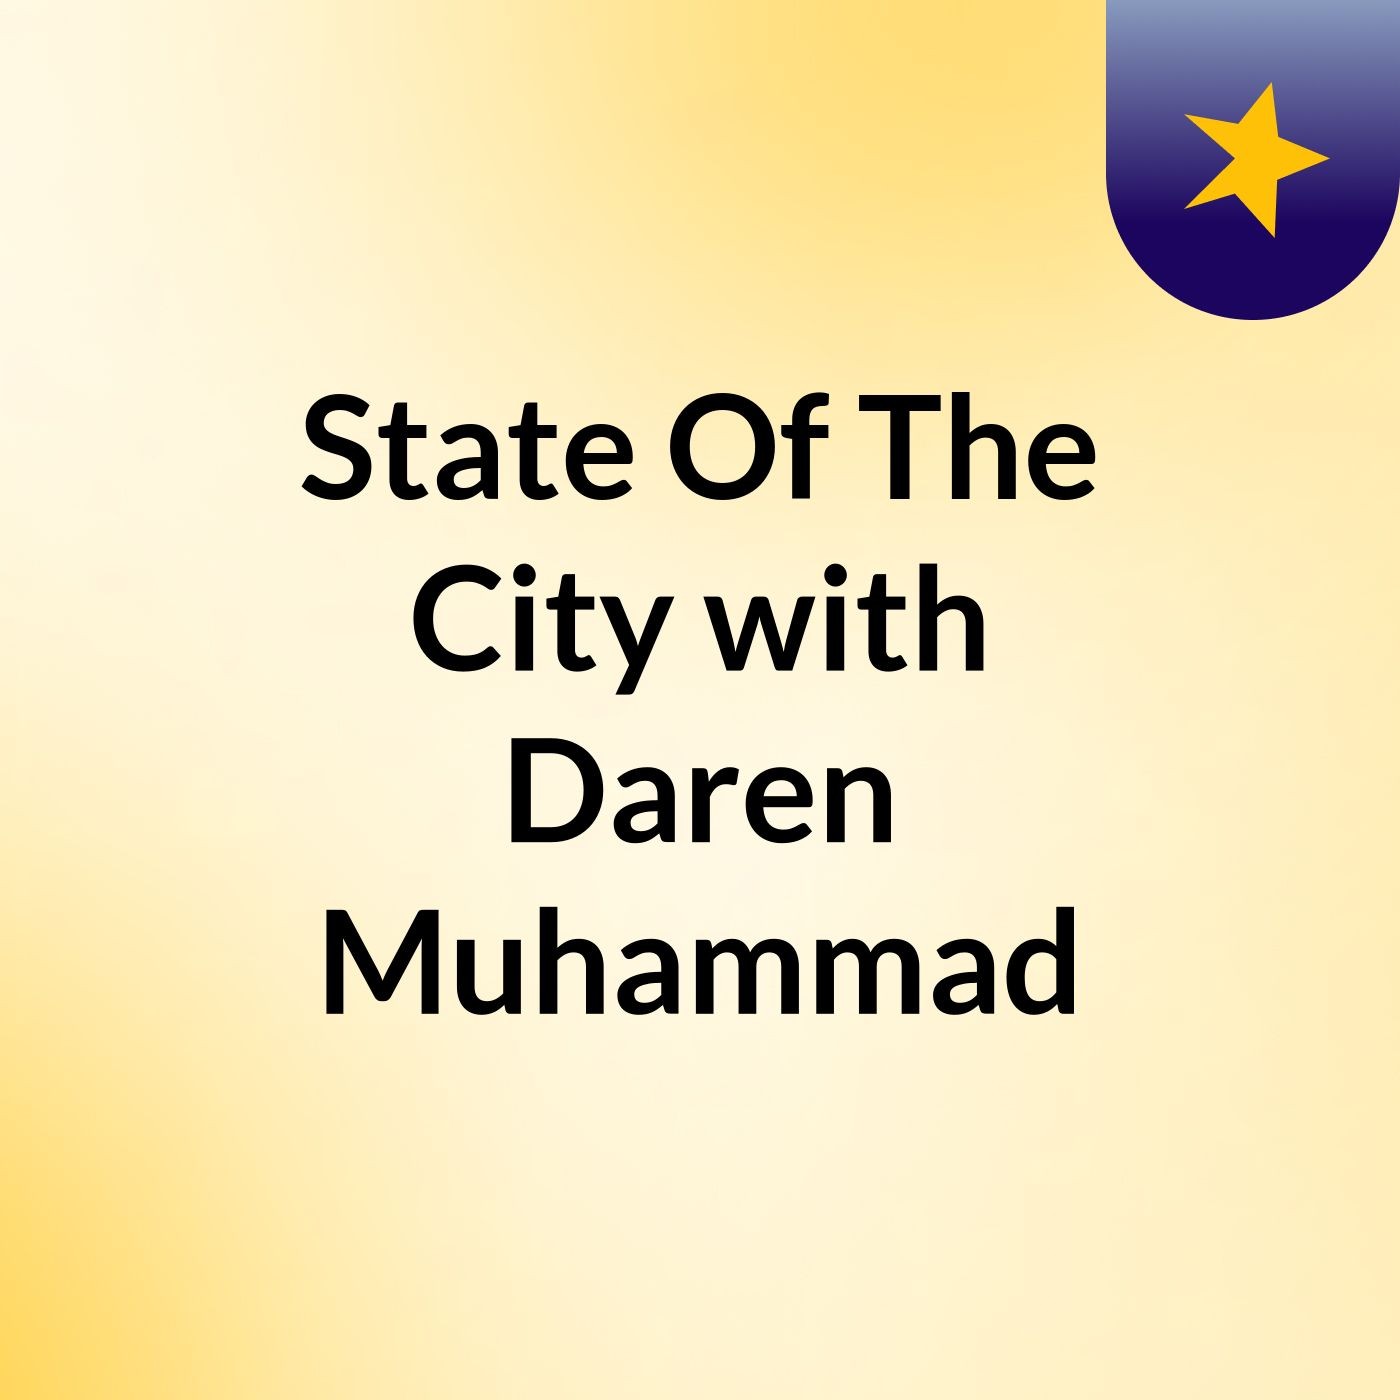 State Of The City with Daren Muhammad